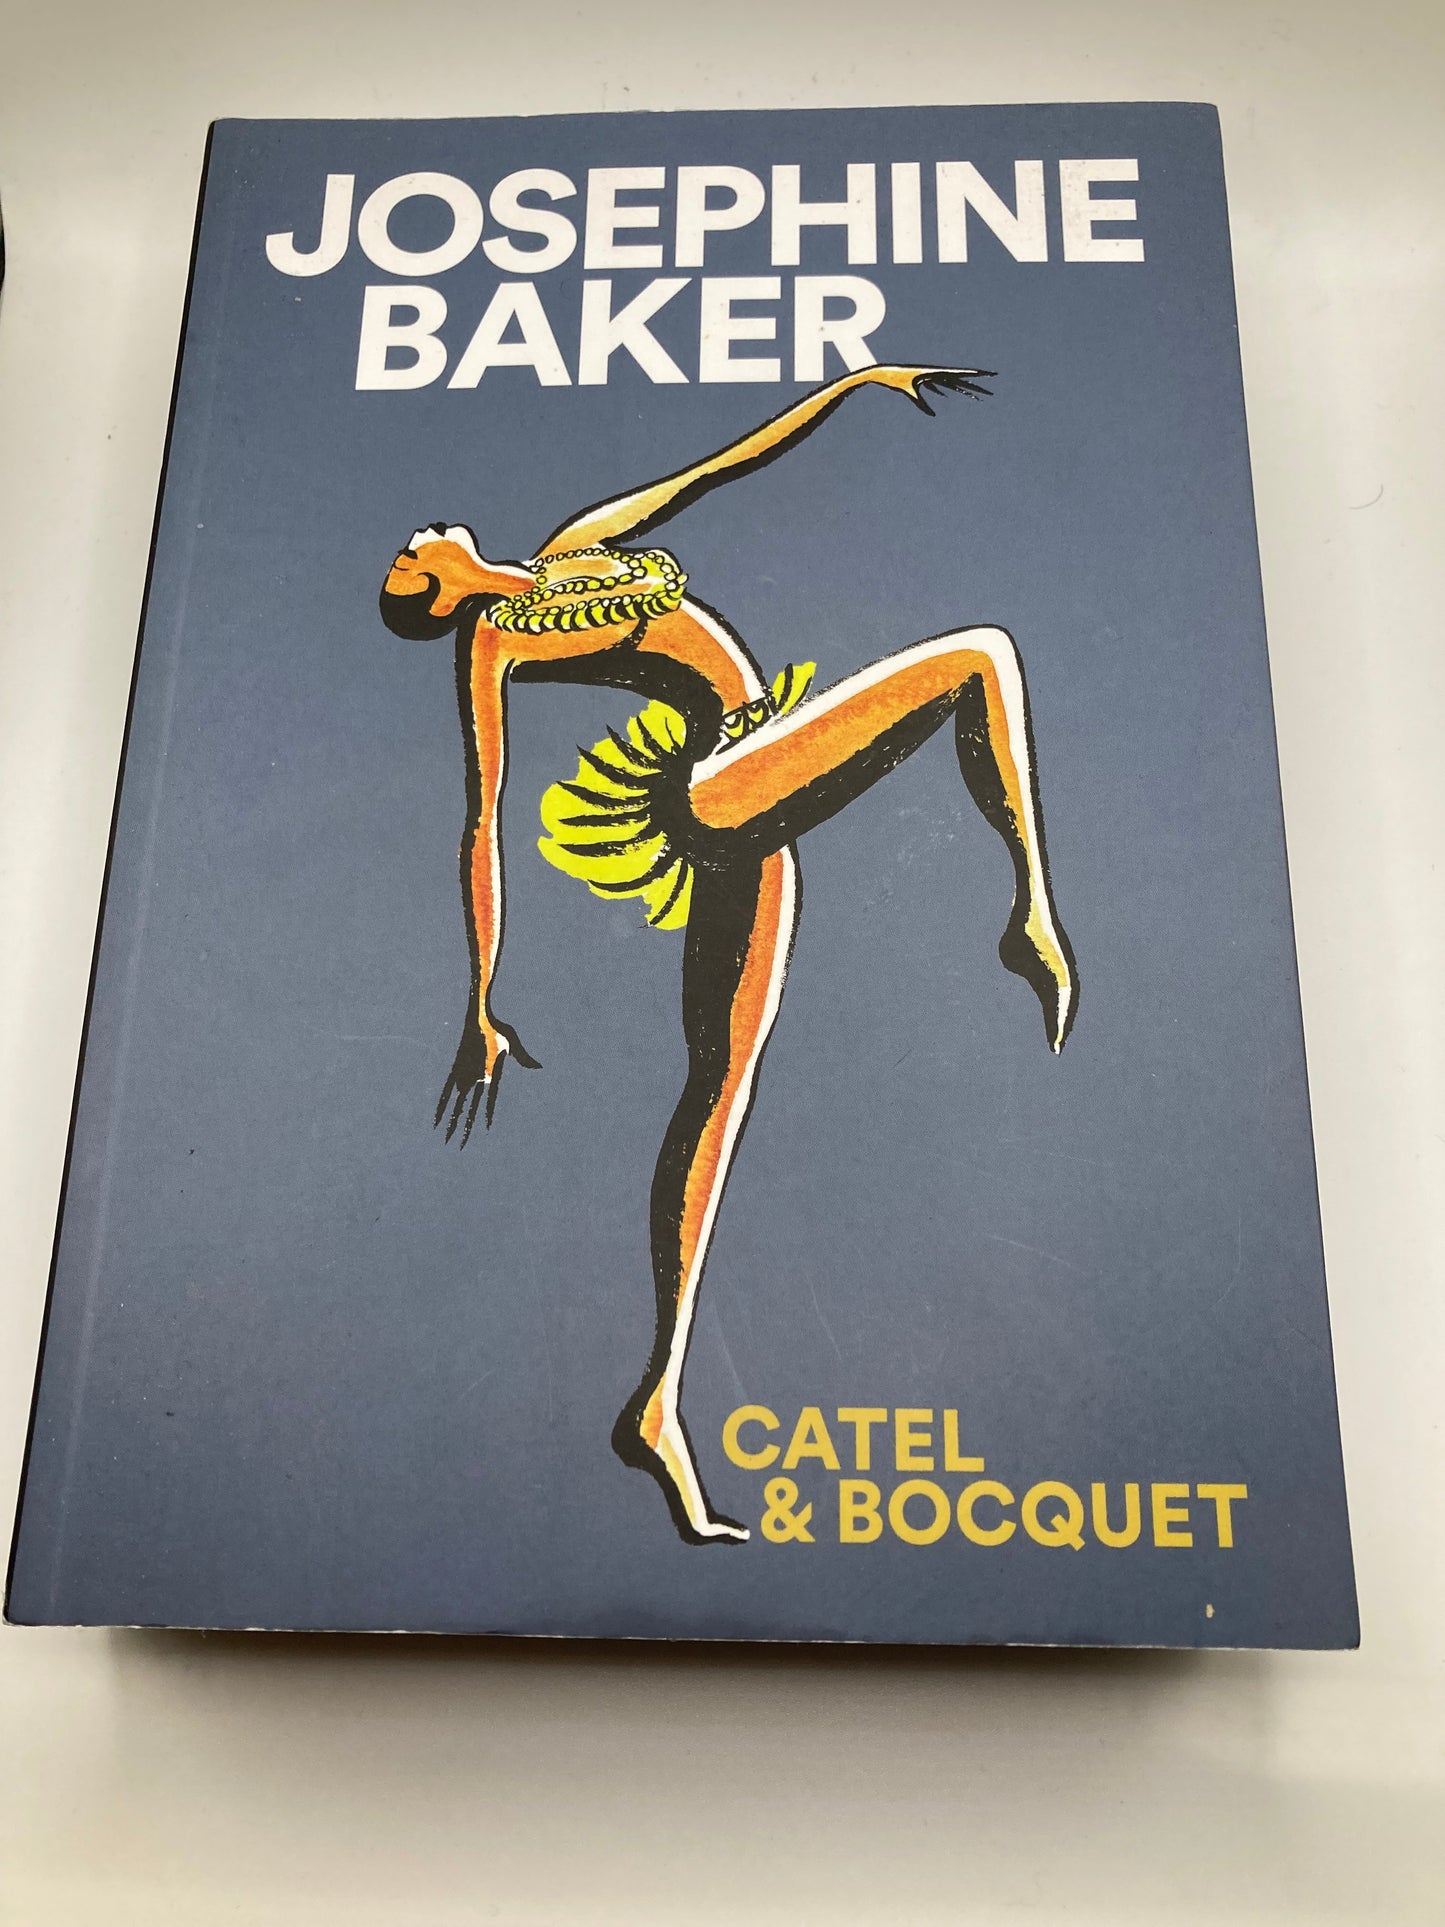 Josephine Baker by Catel and Bocquet